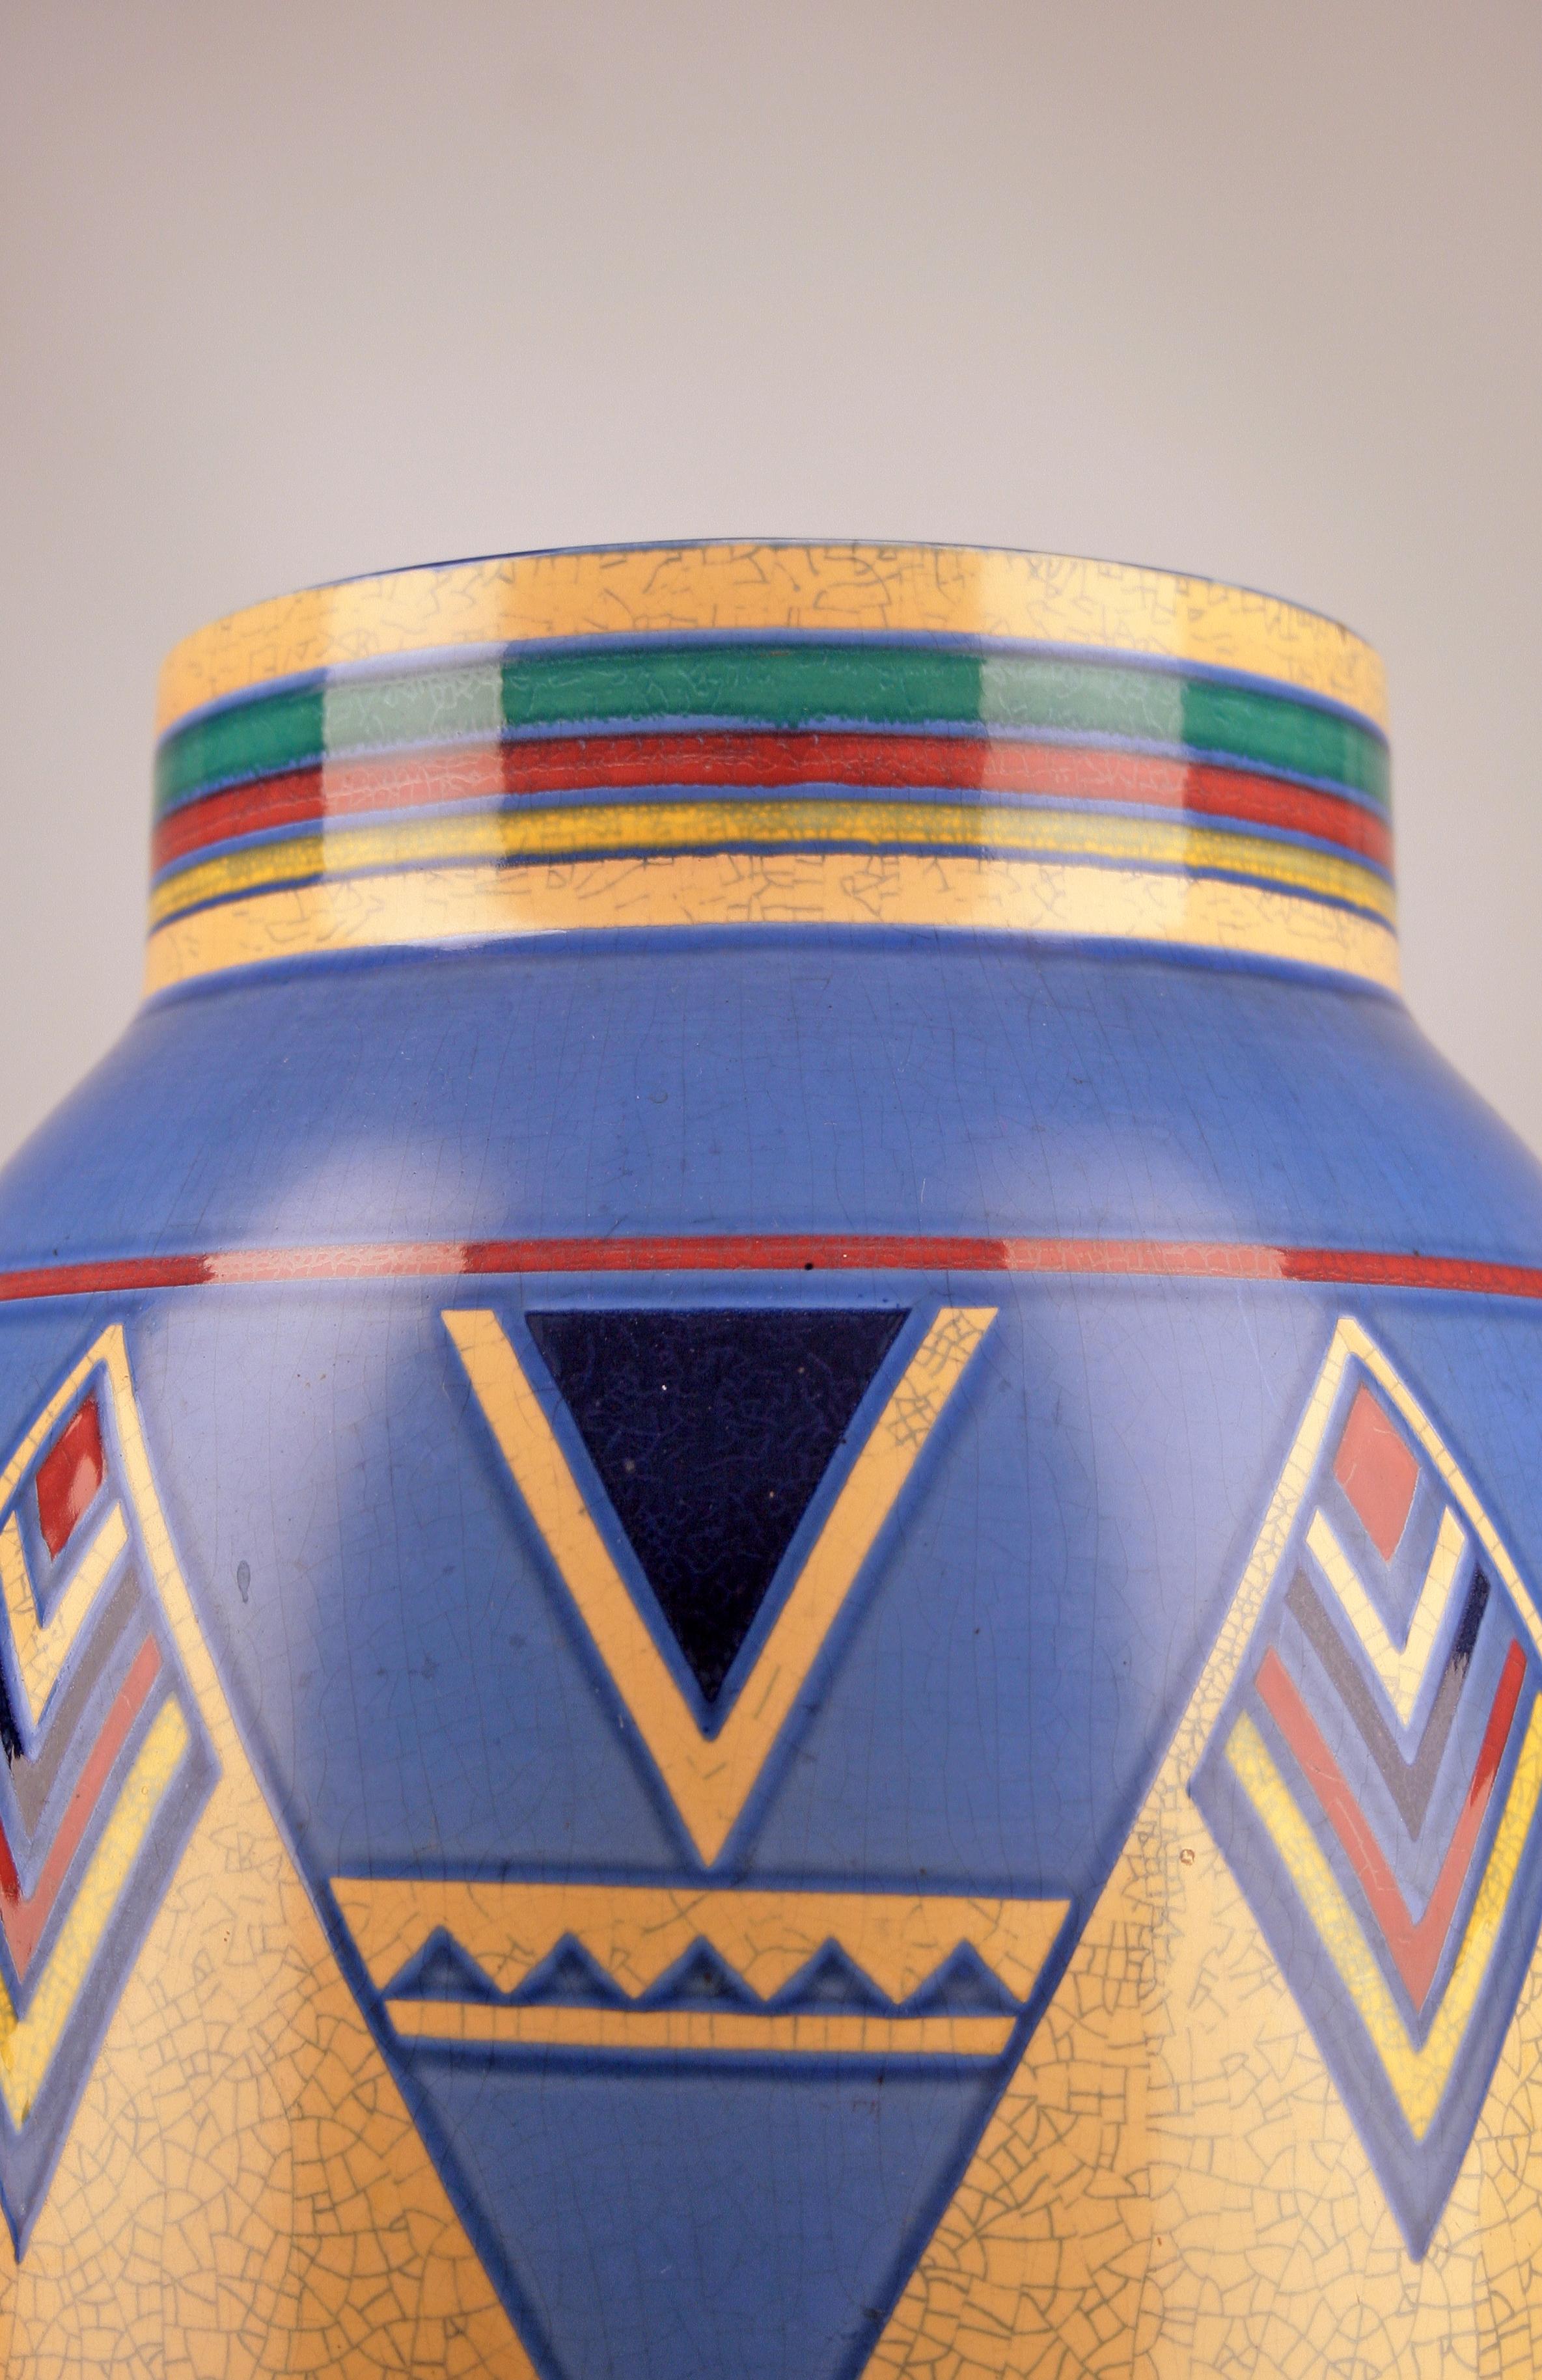 Mid-Century Modern Mid-20th Century Modern Post-War Painted Glazed Ceramic Vase from West Germany For Sale